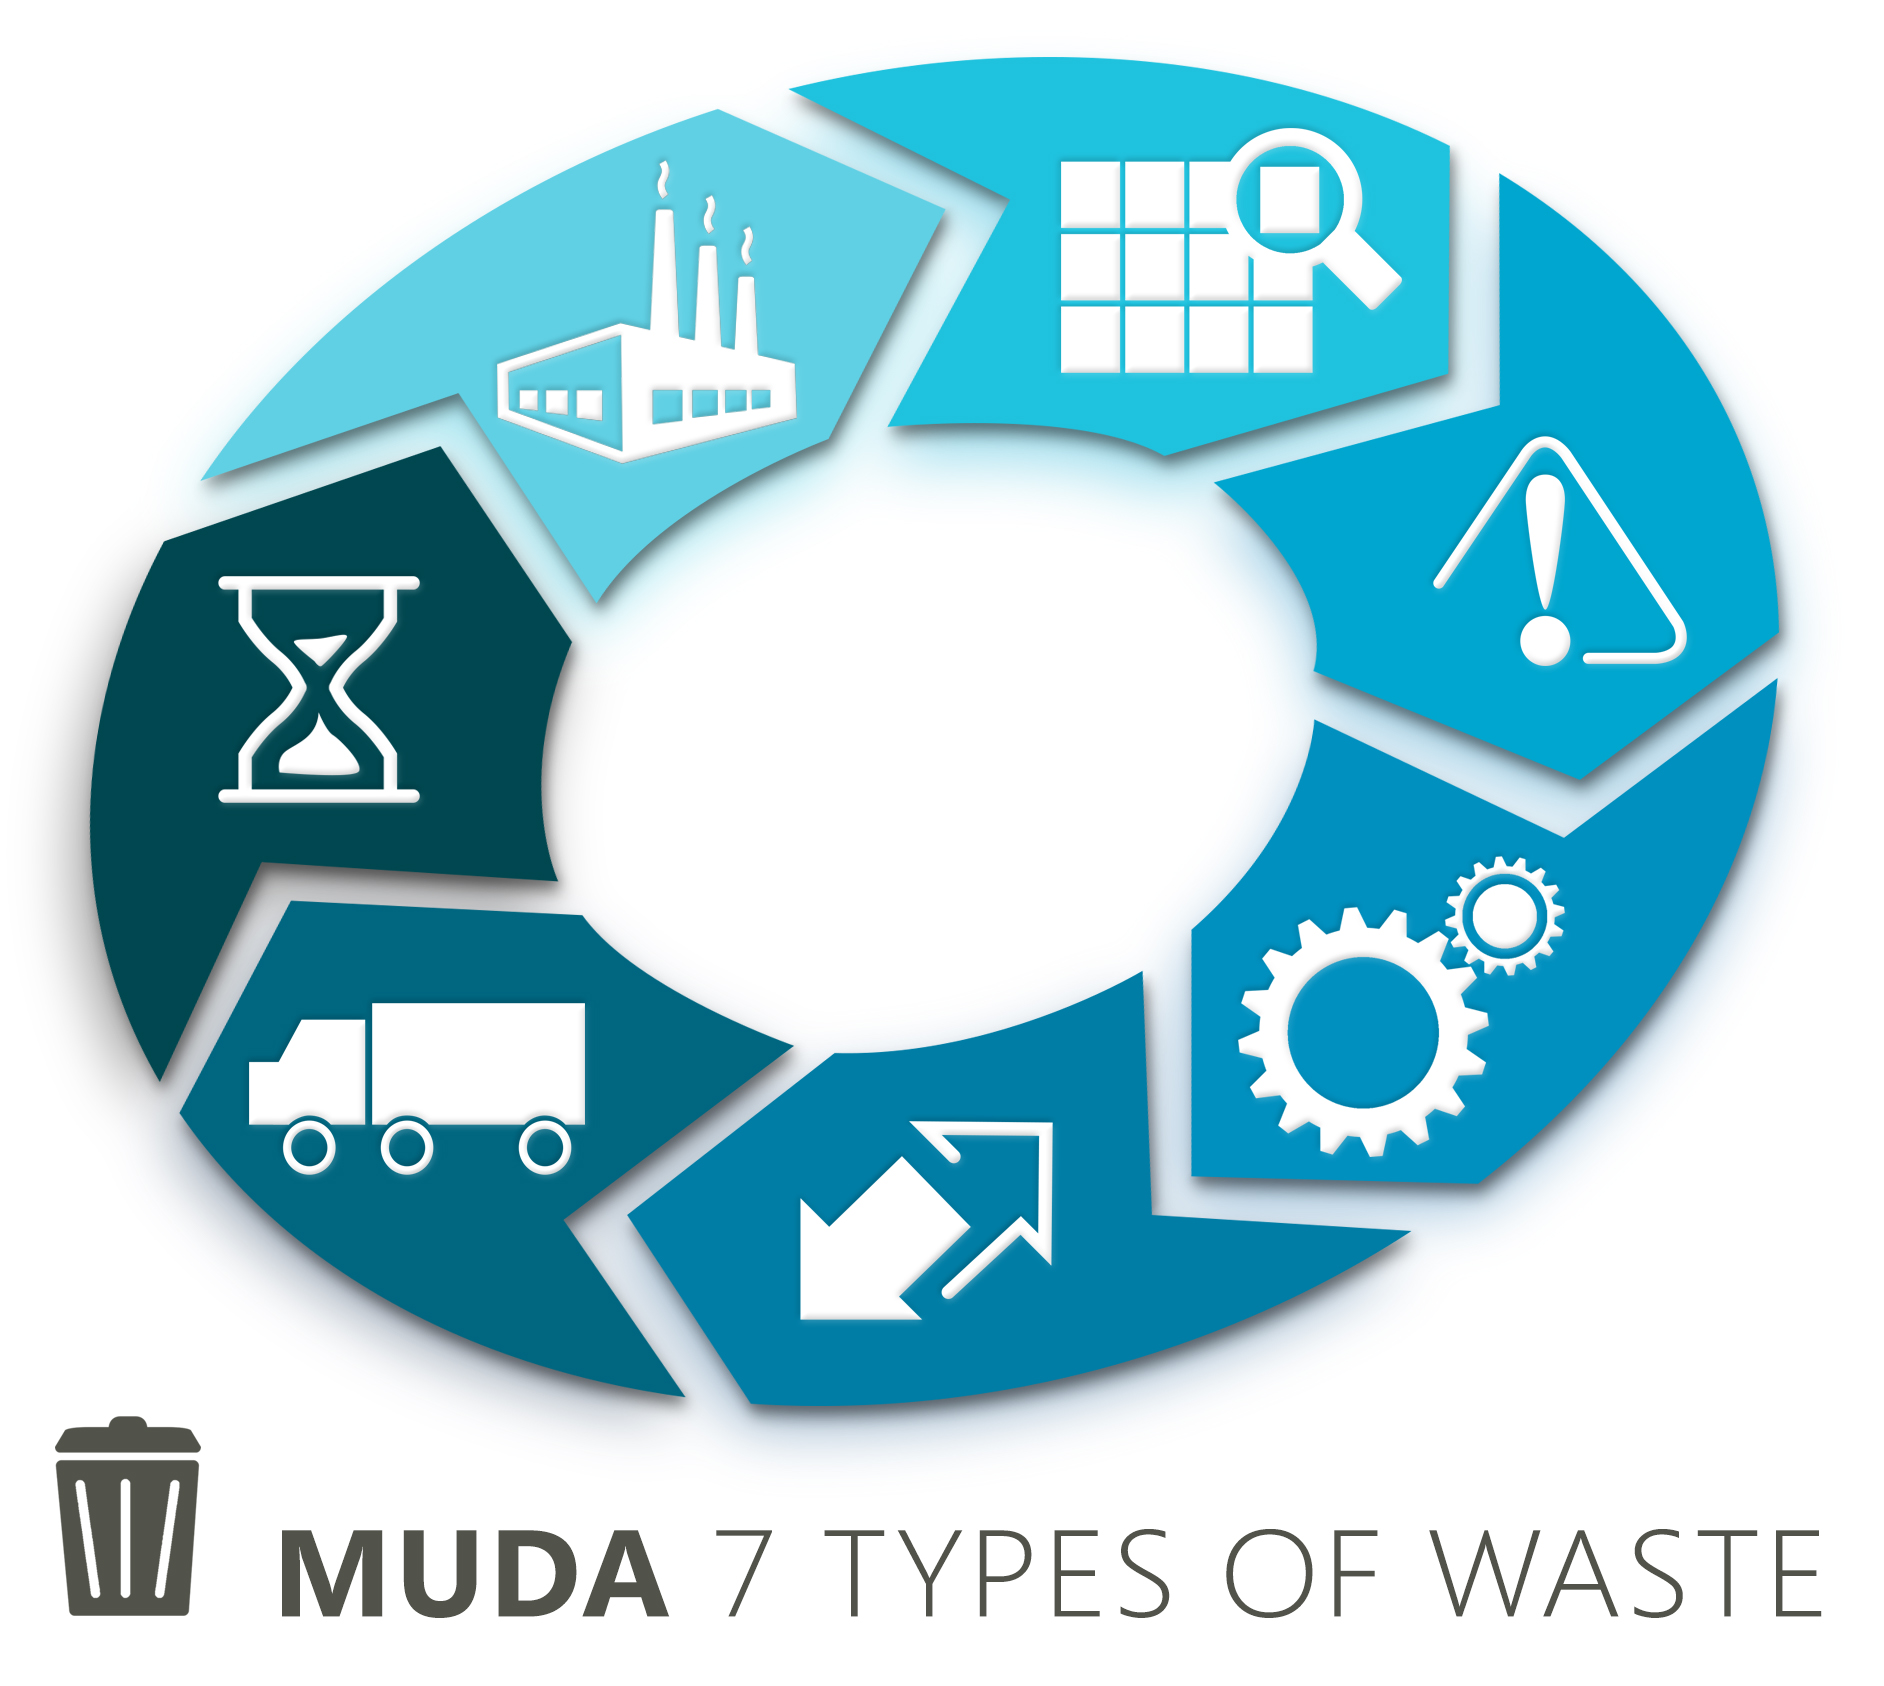 Types of waste